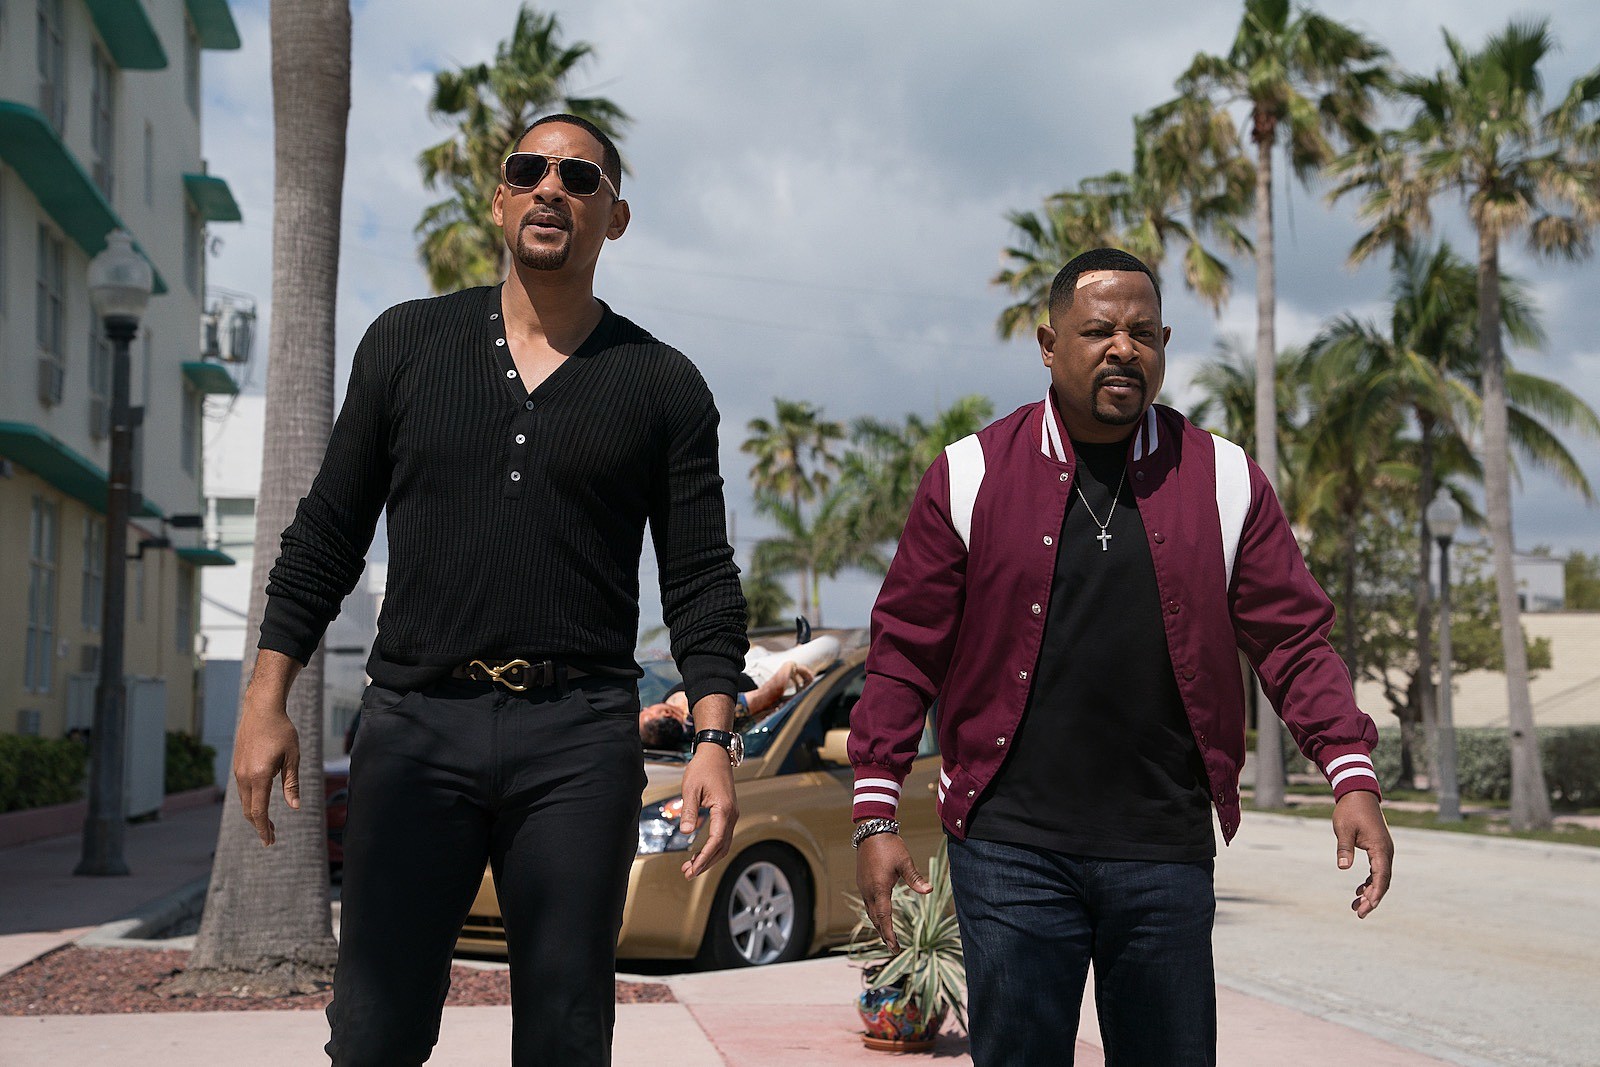 Bad Boys For Life' Review: What You Gonna Do? Make a Good Movie!